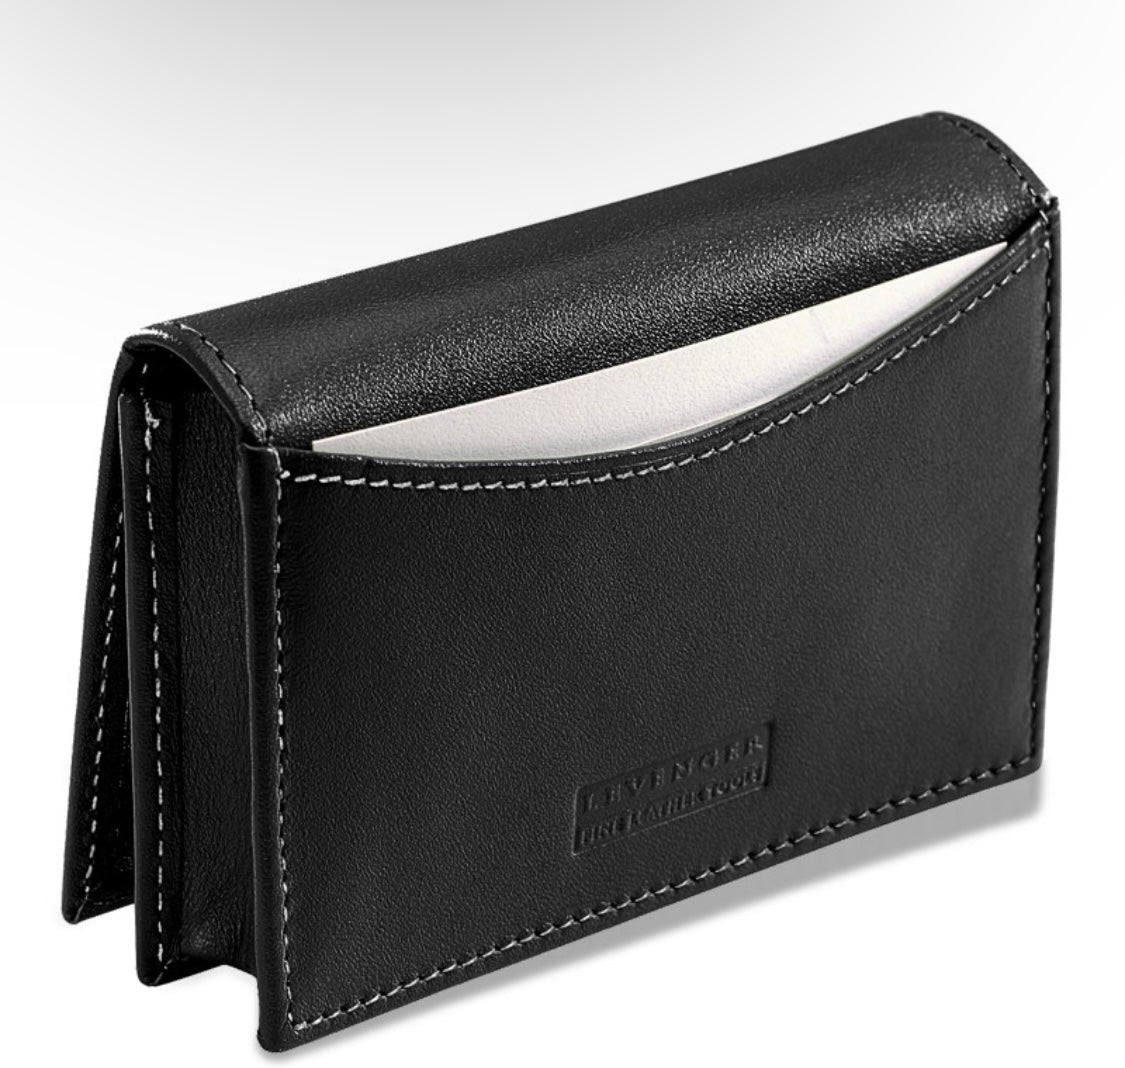 Esquire Leather Business Cardholder